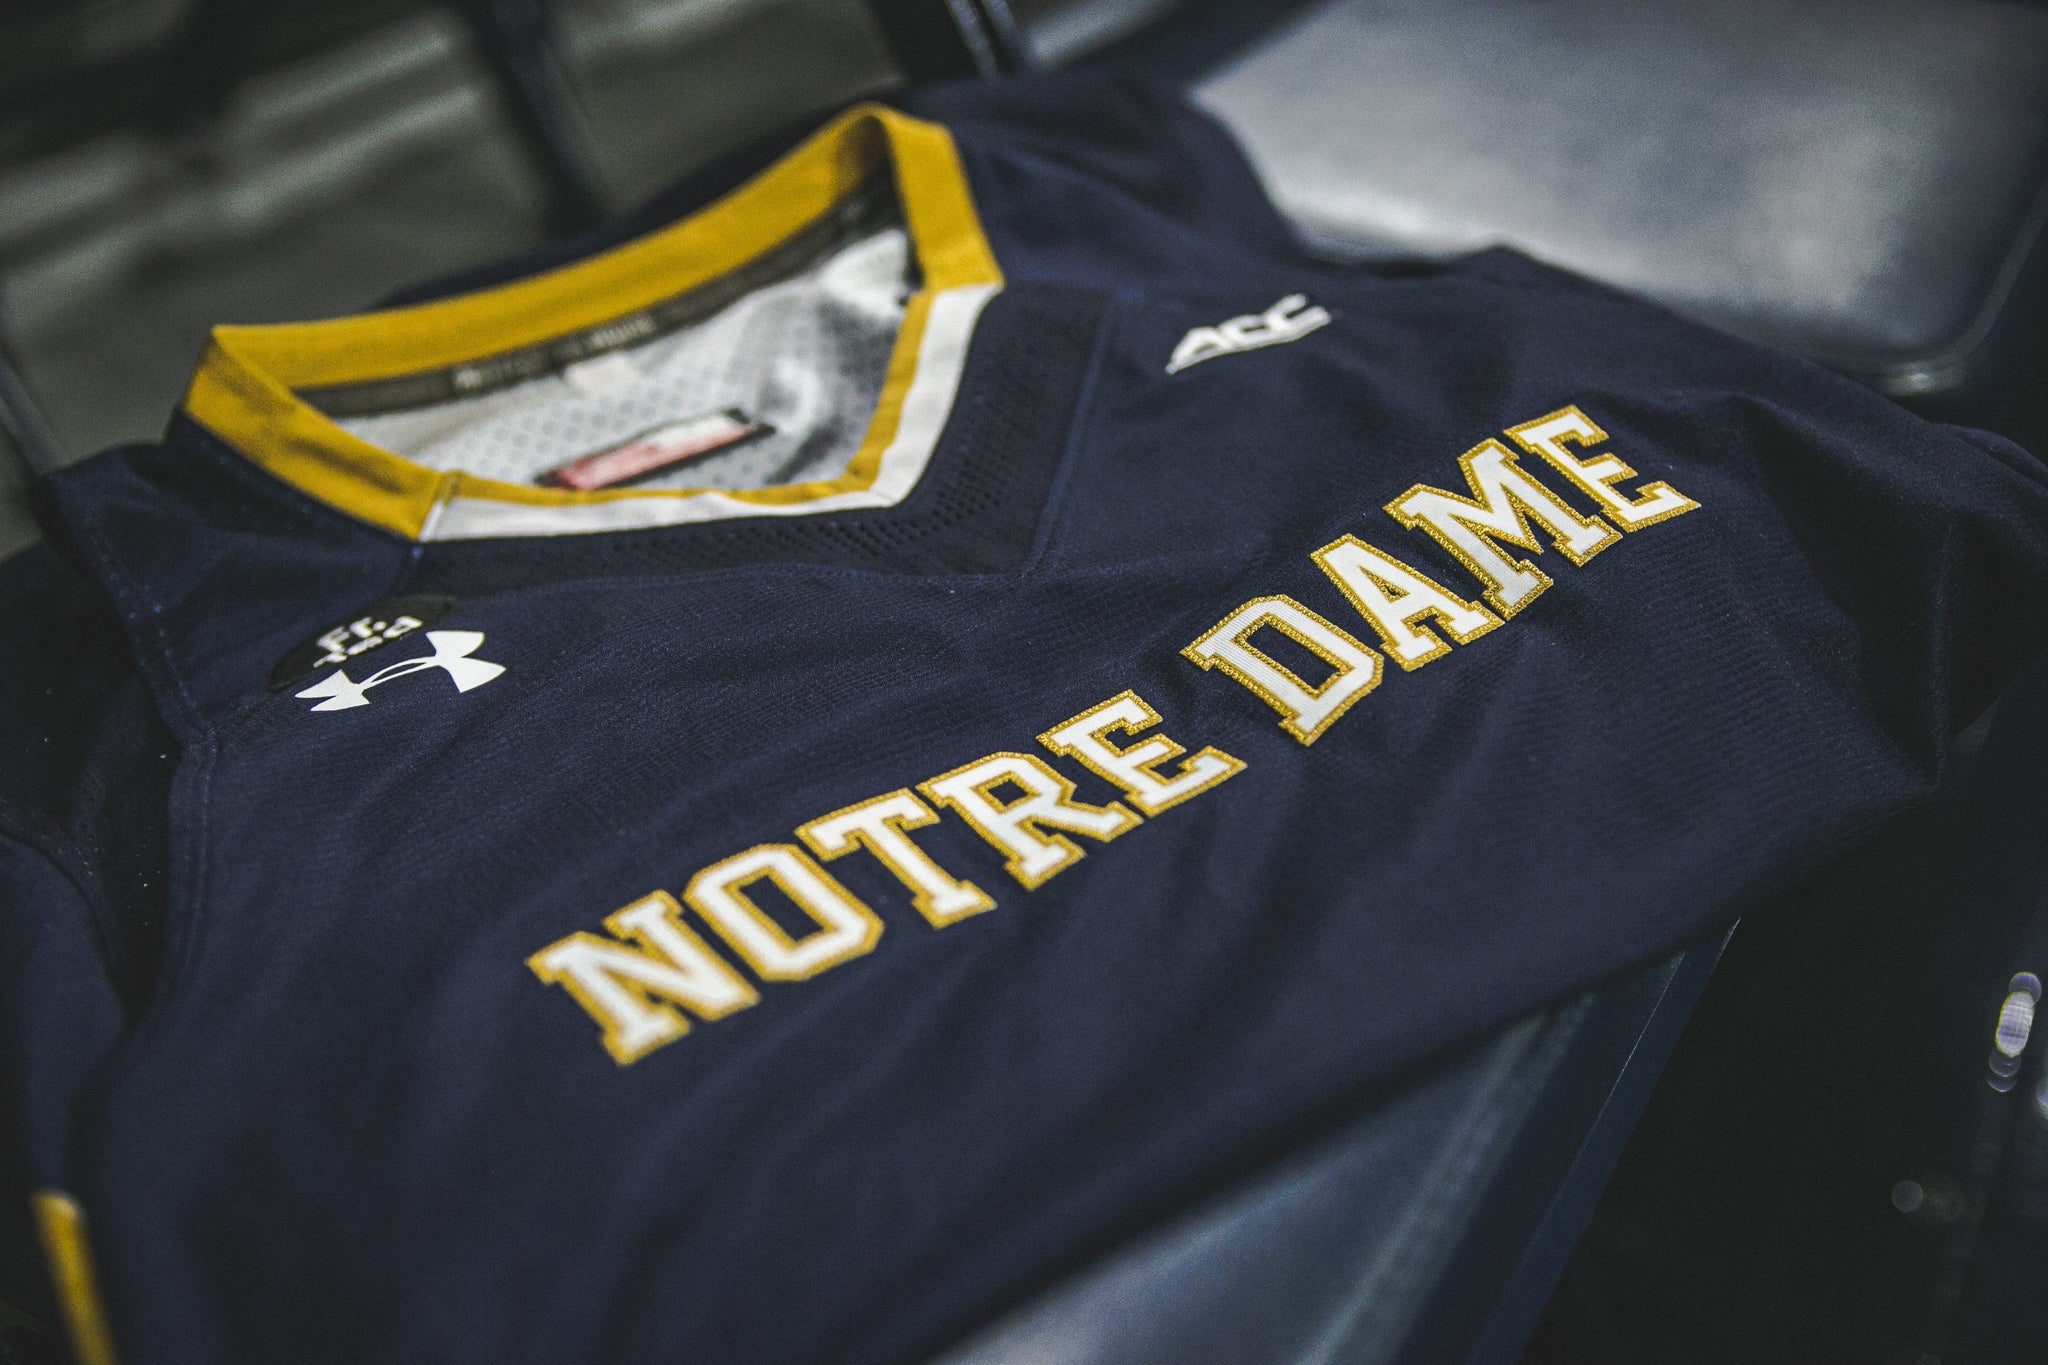 Notre Dame Women's Basketball Blue Under Armour Jersey - Pick Your Own Number - Size: Medium